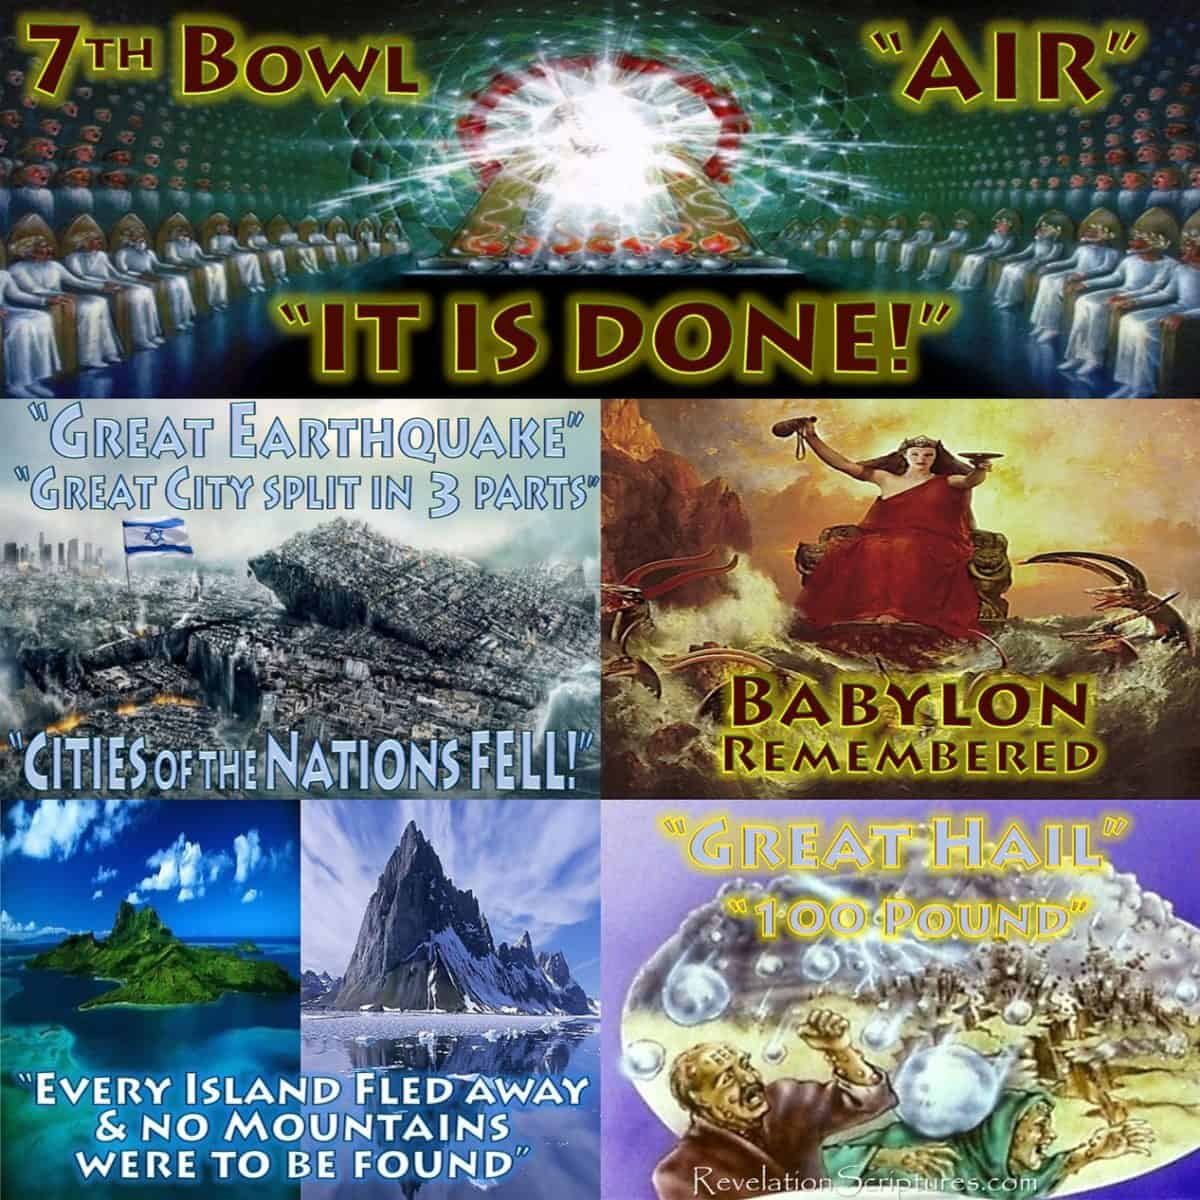 Seventh Bowl,7th Vail,7th Bowl,Vail.Wrath.Air.It is Done.Great Earthquake.City of Nations Fell.Island.Mountian.Babylon Remembered.Cup Wrath Hail.Book Revelation,Revelation Chapter 16